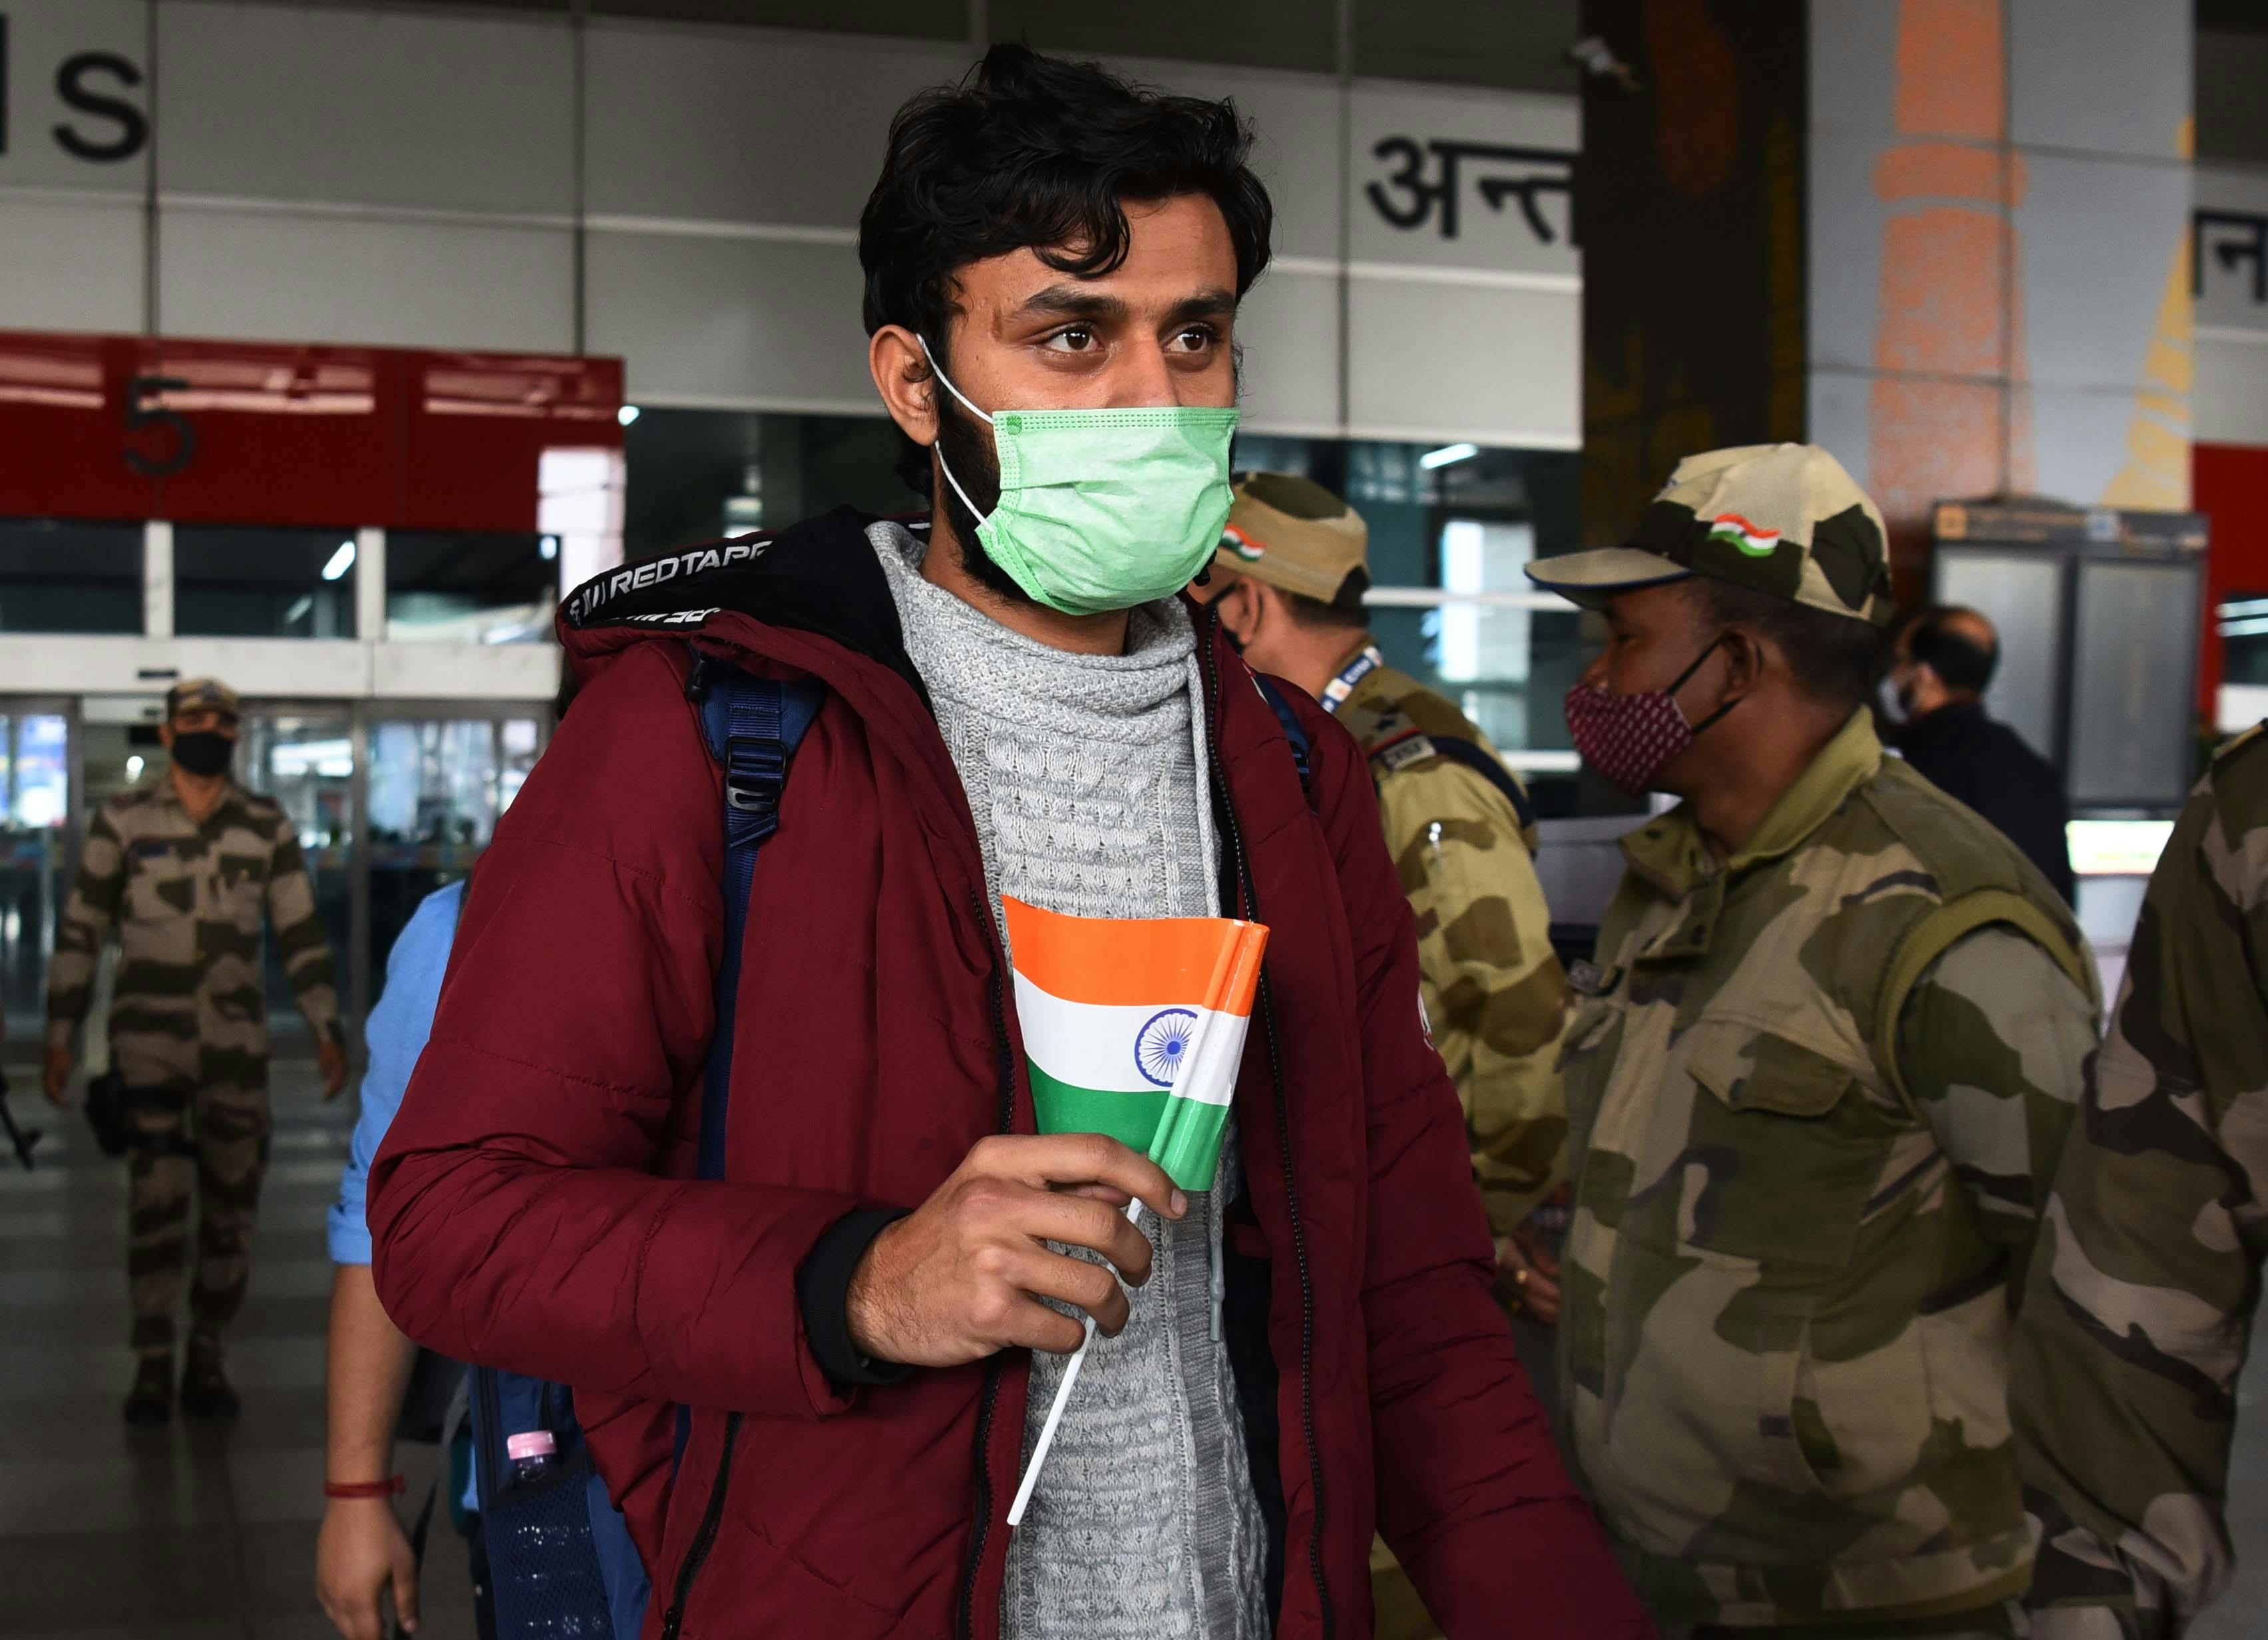 NEW DELHI, INDIA - FEBRUARY 27, 2022: The second evacuation flight of Air India, carrying 250 Indian nationals stranded in Ukraine, landed at Indira Gandhi airport during the wee hours of Sunday. The flight took off from Romanian capital Bucharest on Saturday evening. (Sanjeev Verma/Hindustan Times via Getty Images)